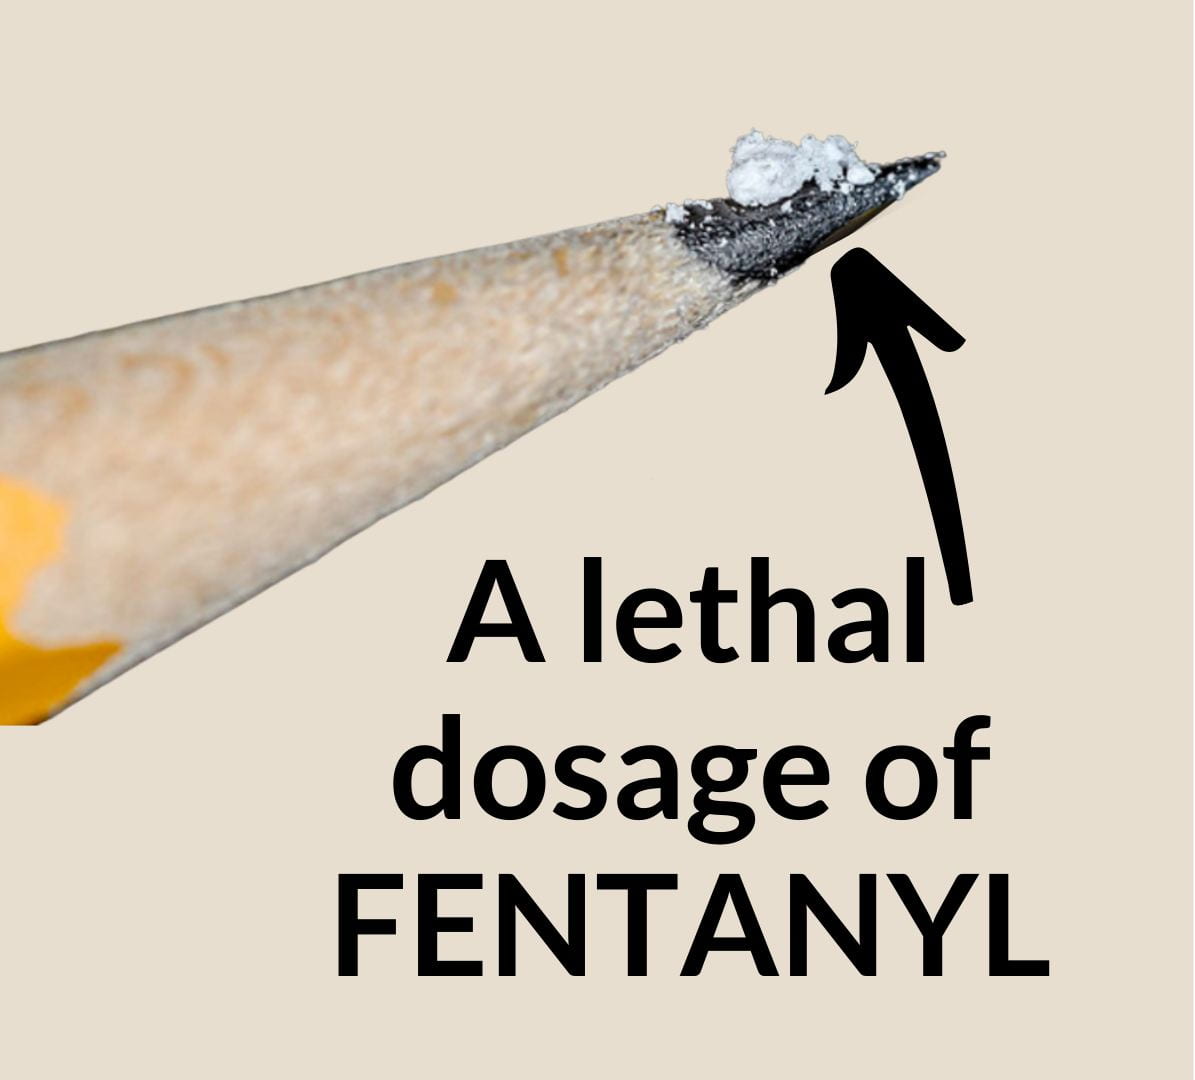 Picture of a small amount of Fentanyl on the end of pencil tip with text that says "A lethal dosage of FENTANYL"